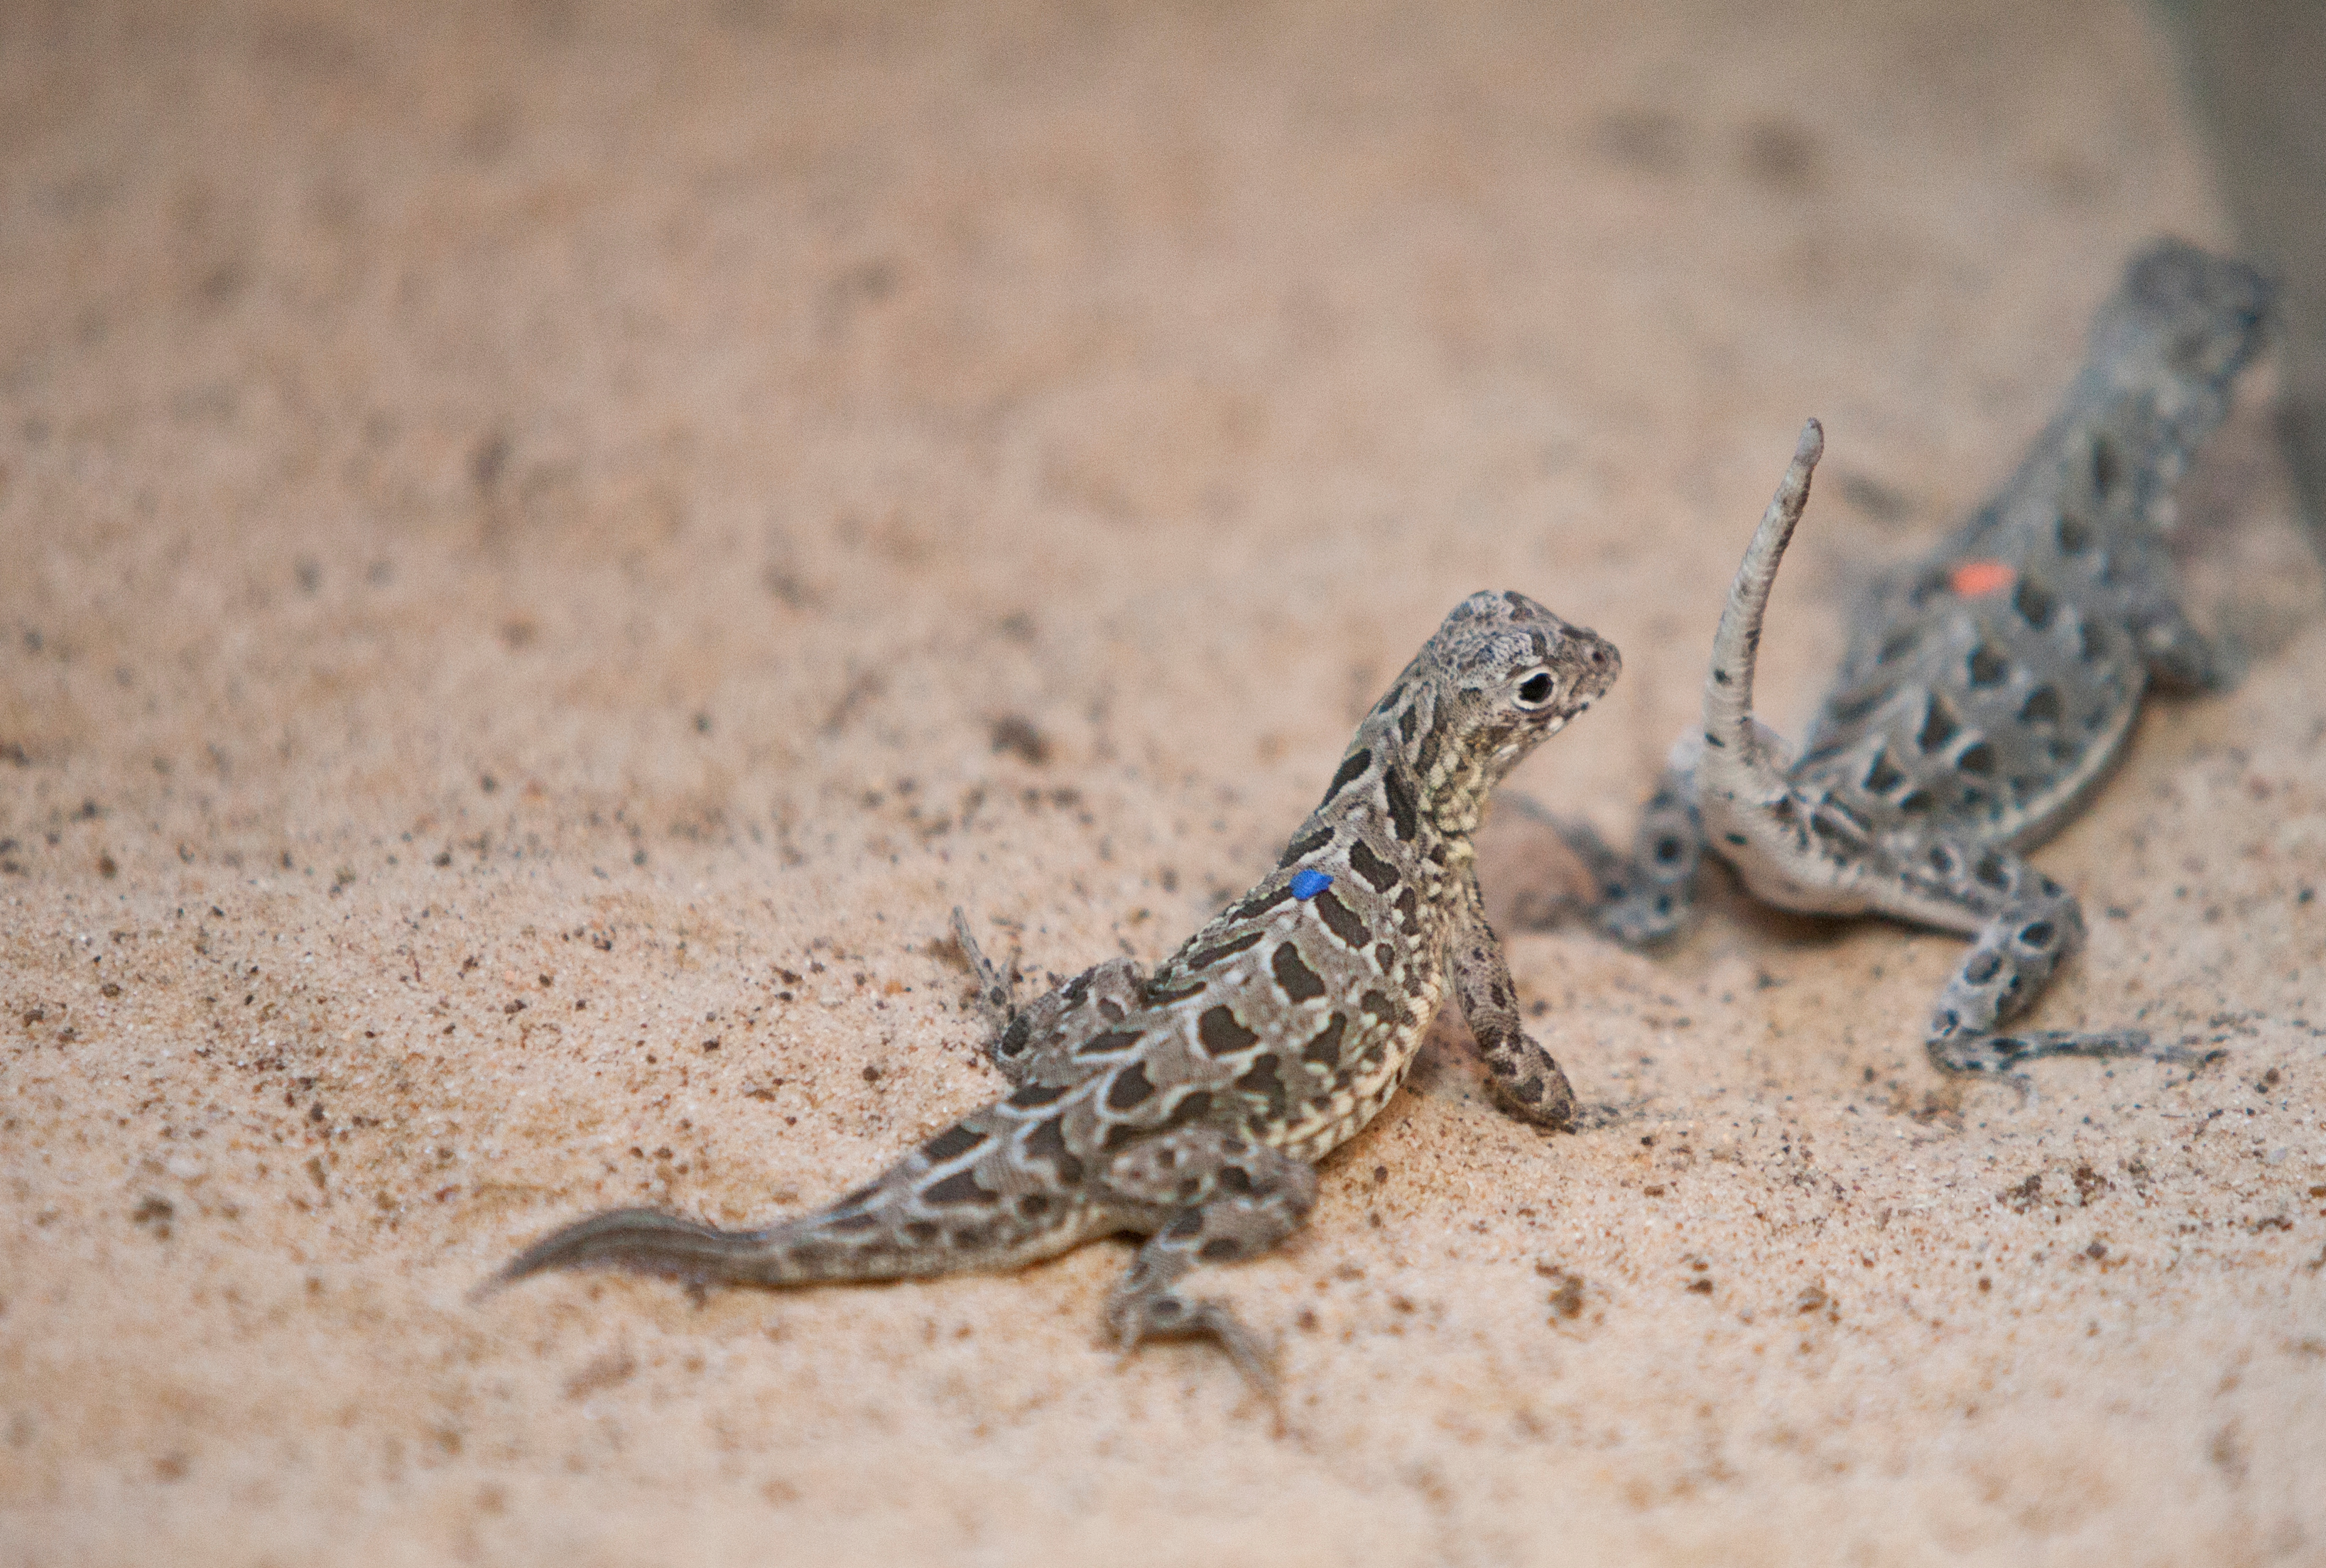 Spot-tailed earless lizards hatched!